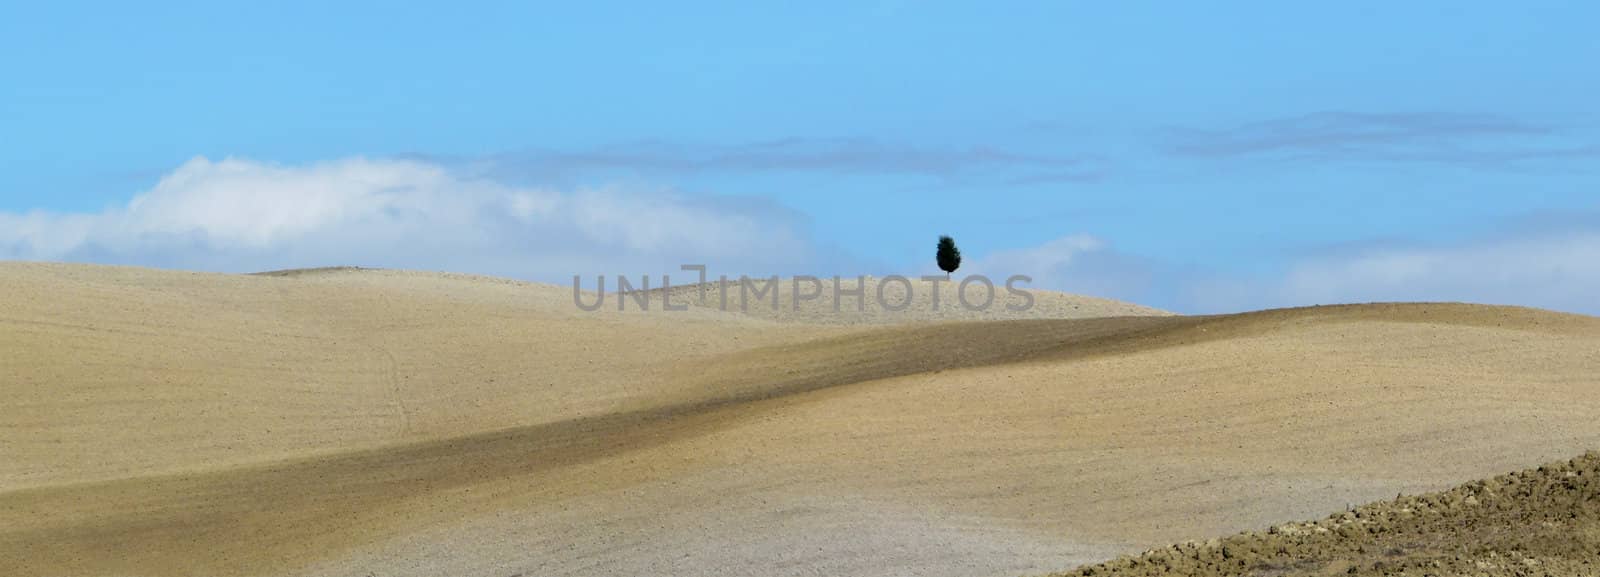 Lonely tree in the typical barren rolling hills of the landscape in Tuscany, Italy.